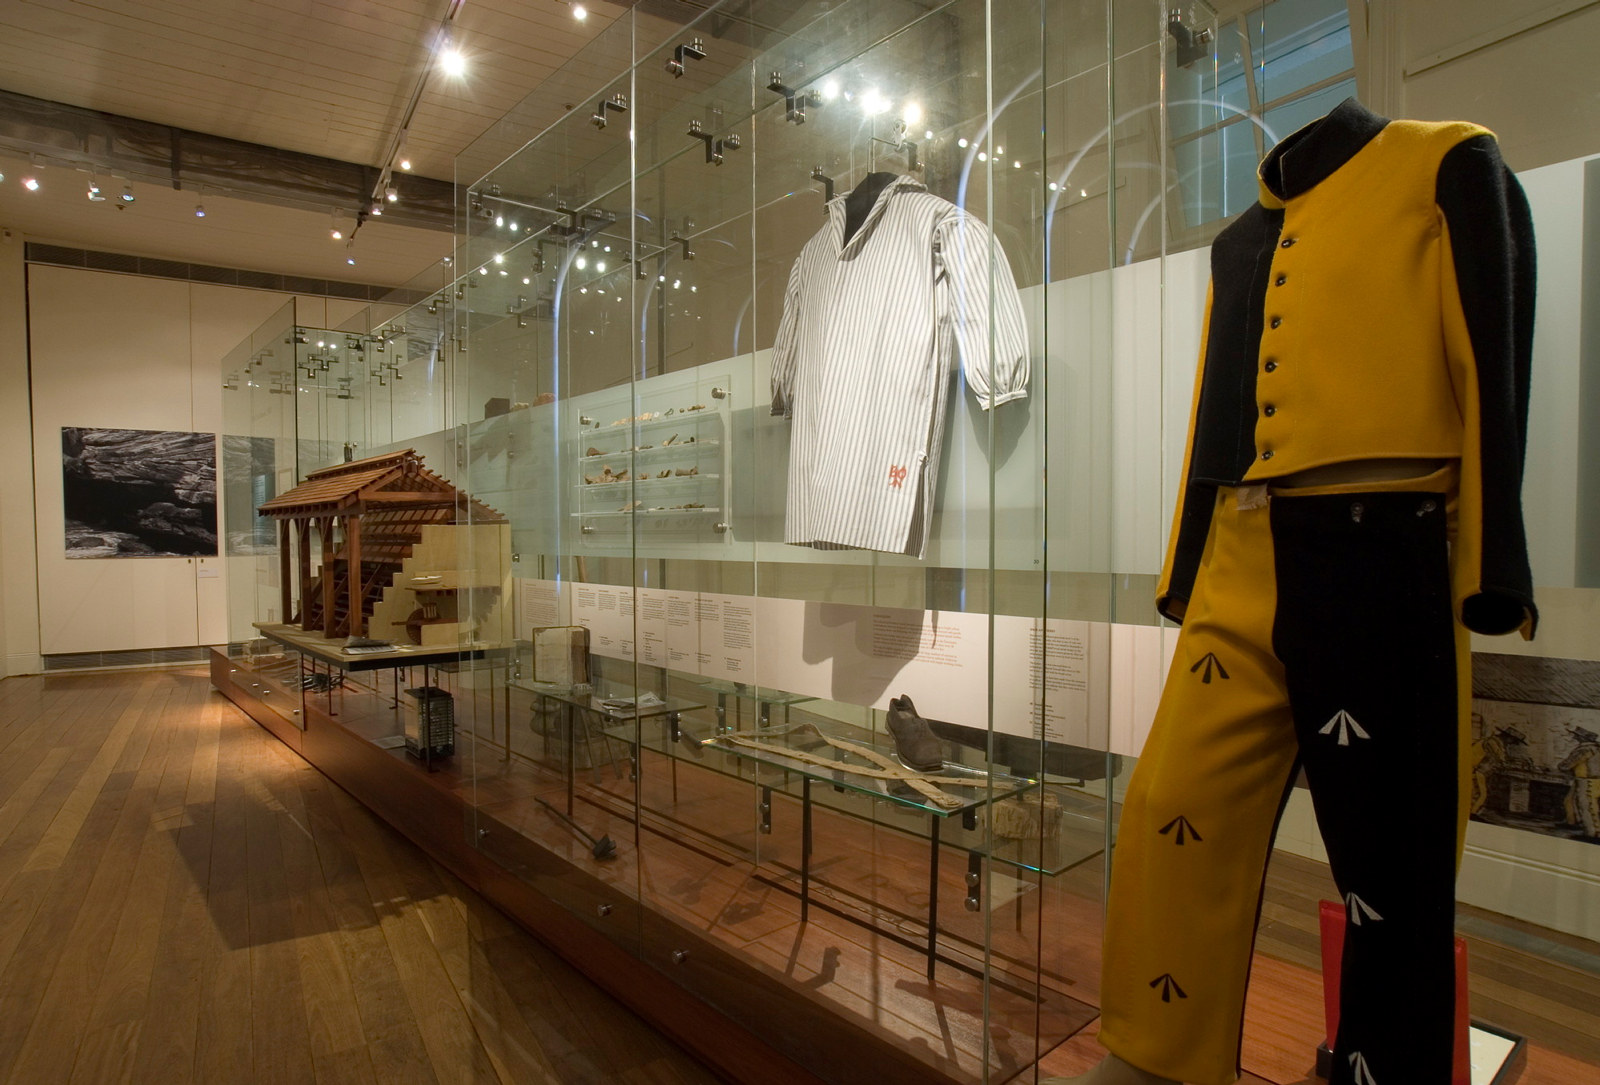 Documentation of Convicts: sites of punishment exhibition showing uniforms